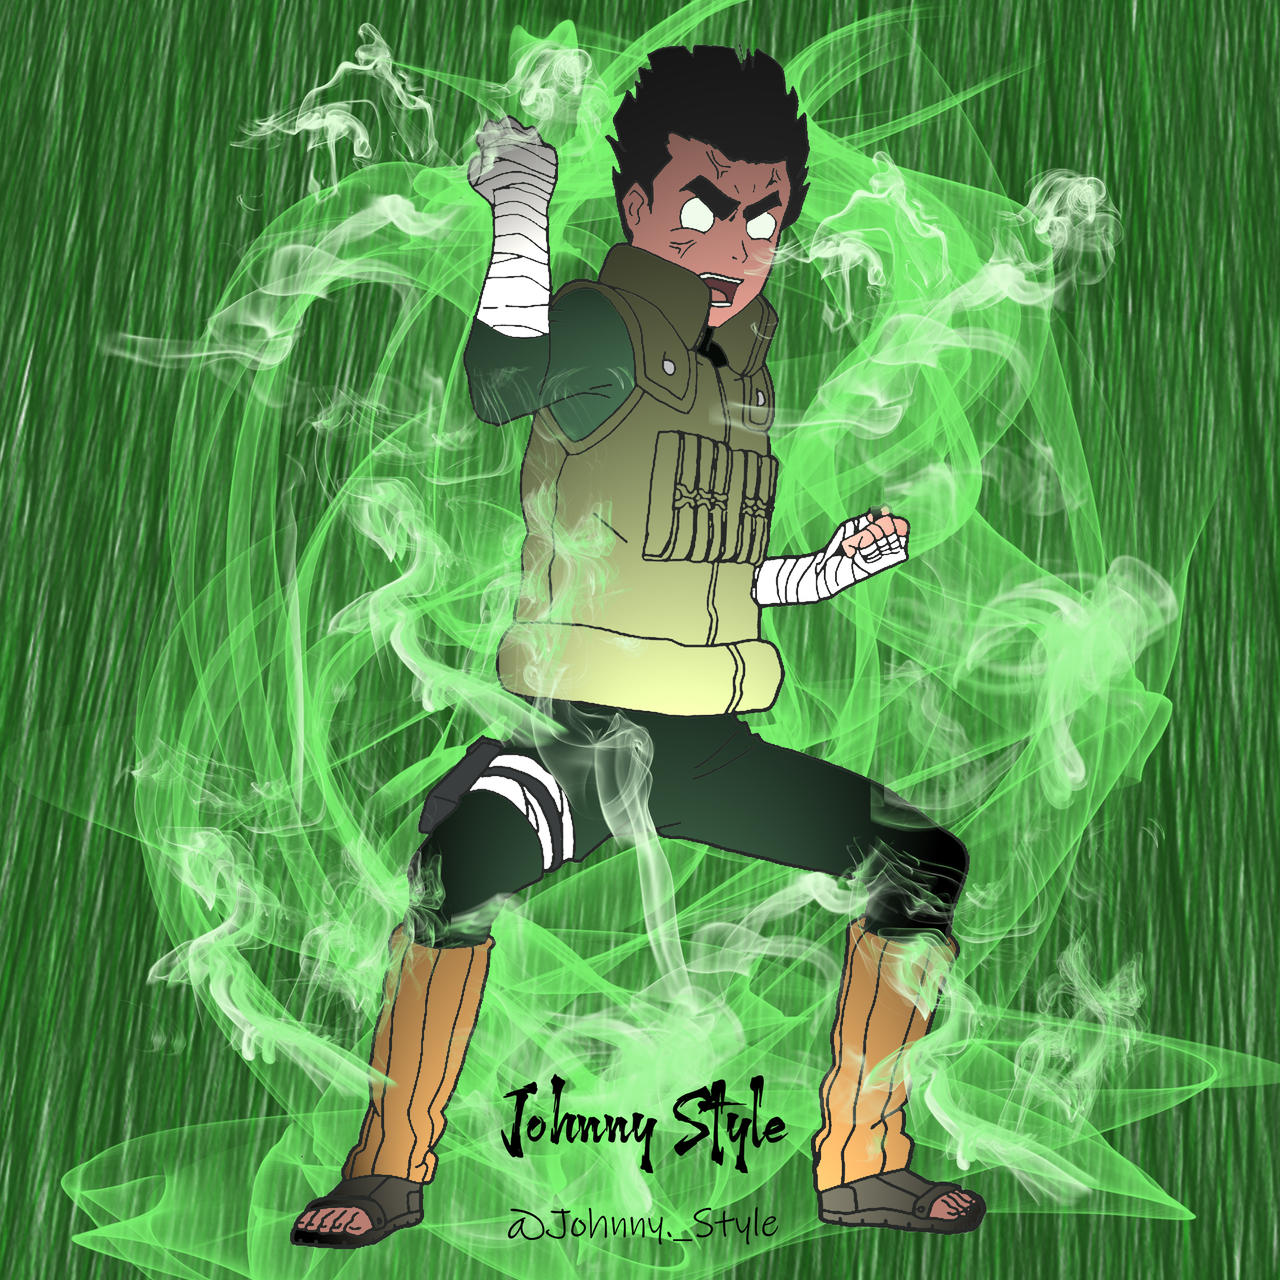 Rock Lee by johnnystyle7 on DeviantArt